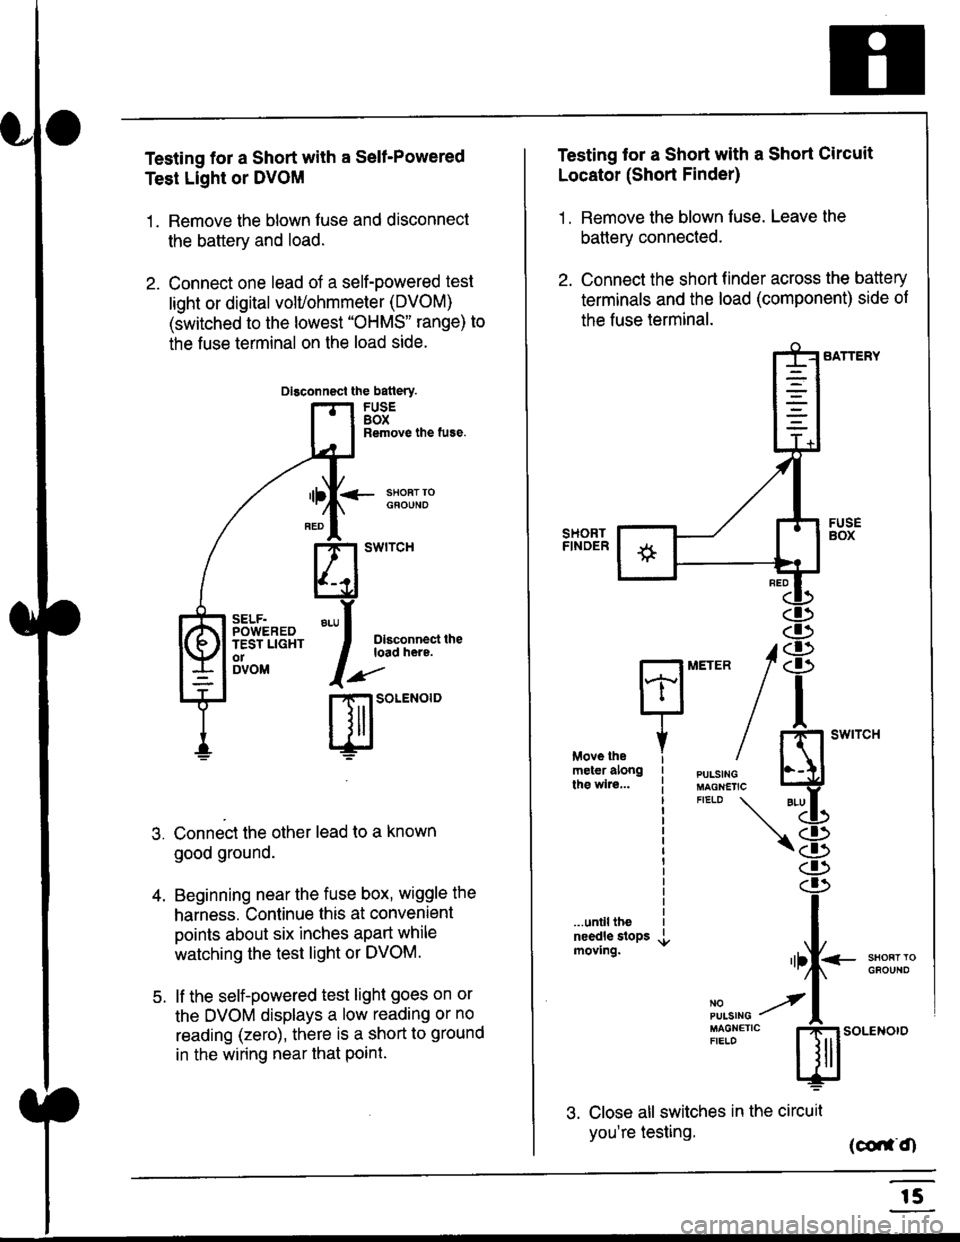 HONDA CIVIC 1997 6.G Workshop Manual Testing for a Short with a Sell-Powered
Test Light or DVOM
1. Remove the blown fuse and disconnect
the battery and load.
2. Connect one lead of a self-powered test
light or digital volUohmmeter (DVOM)